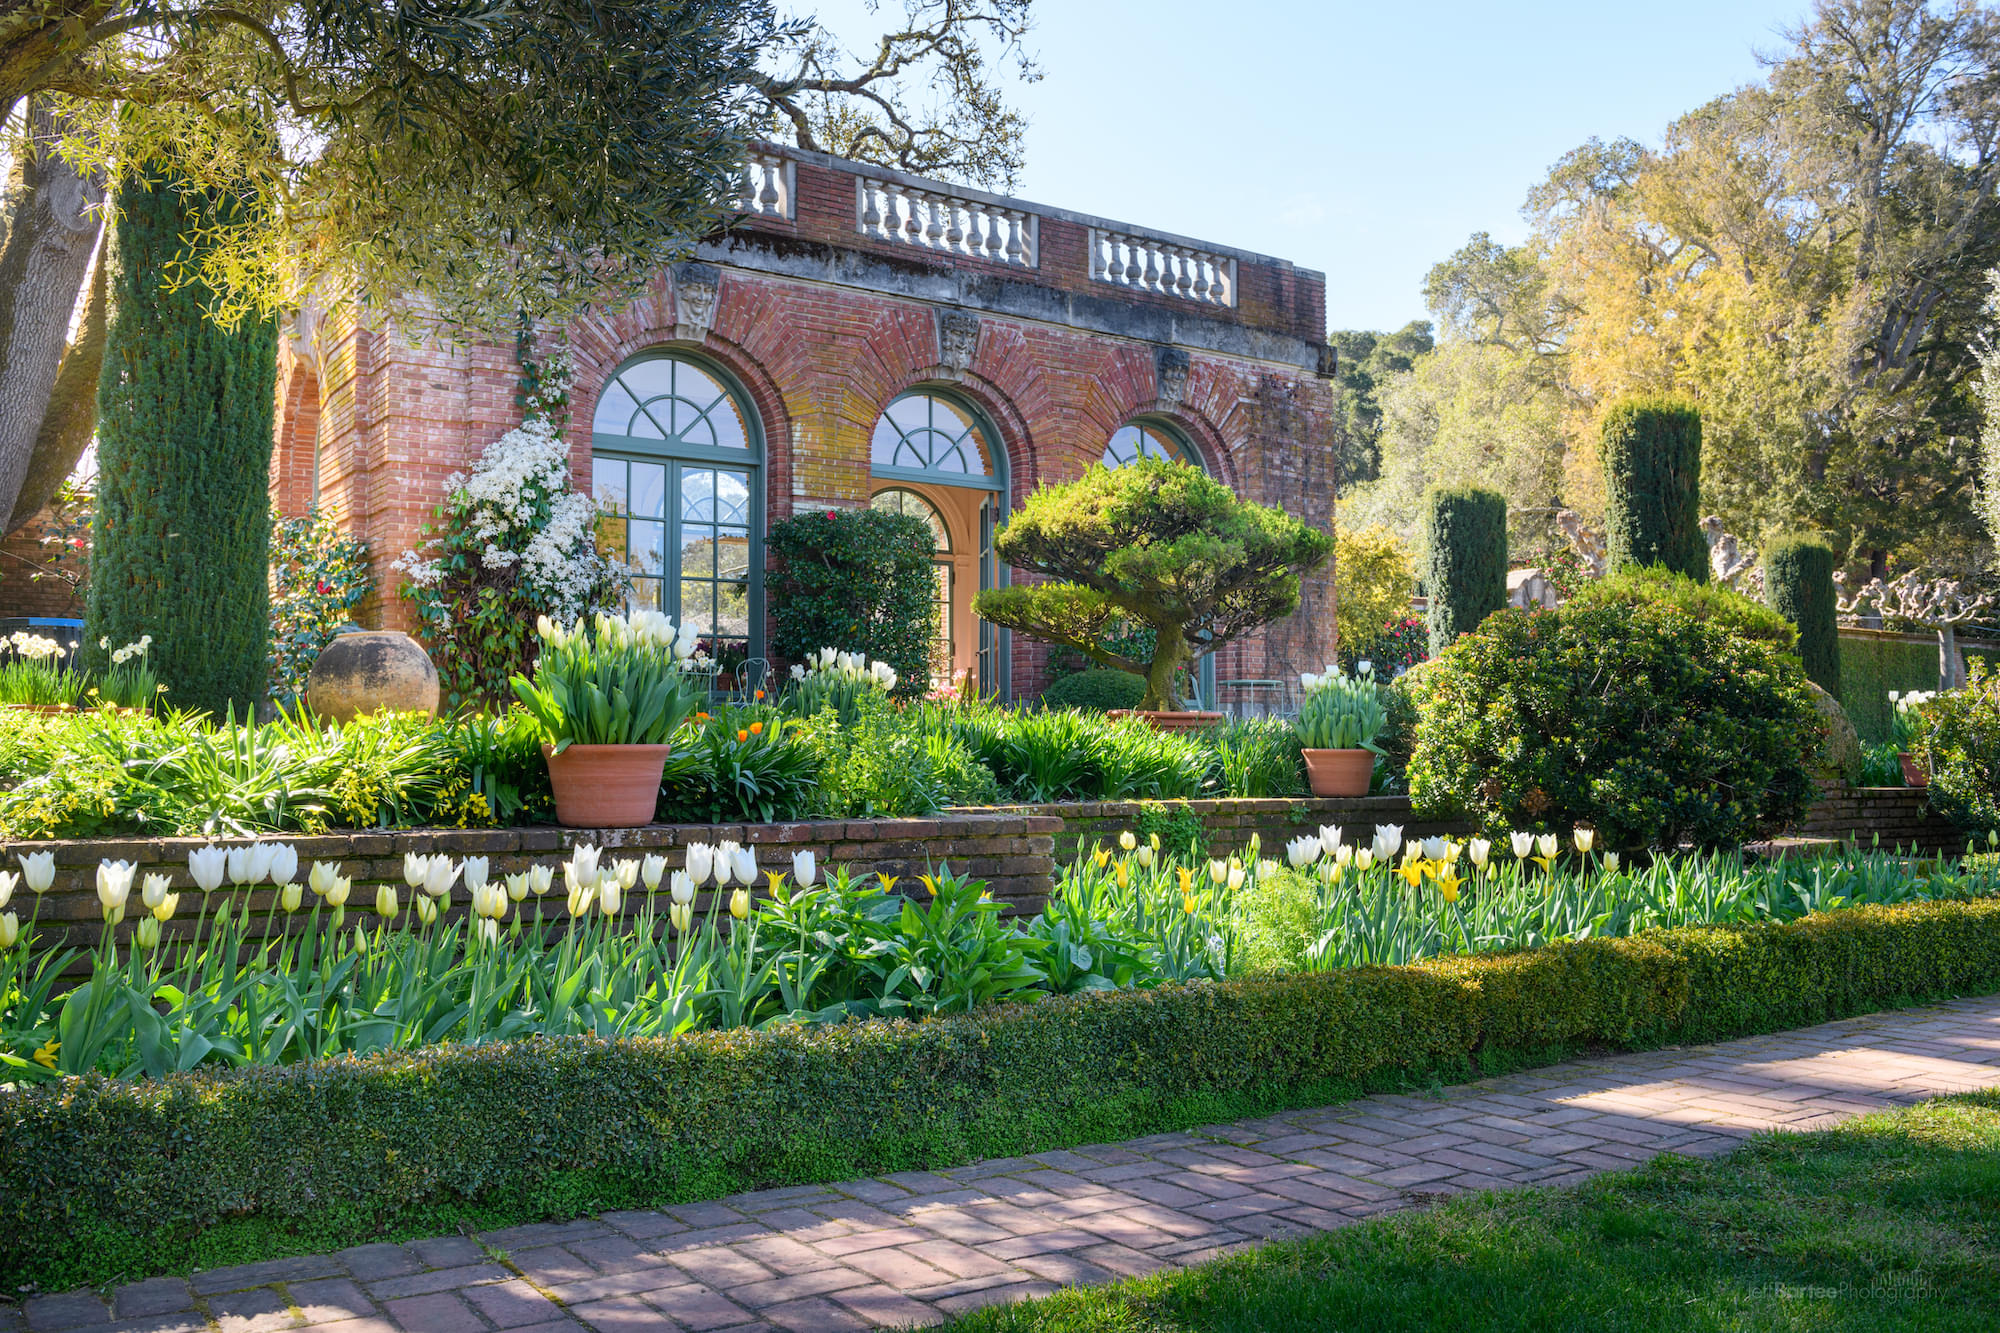 Visit Filoli Historic House and Gardens with your family and spend amazing time